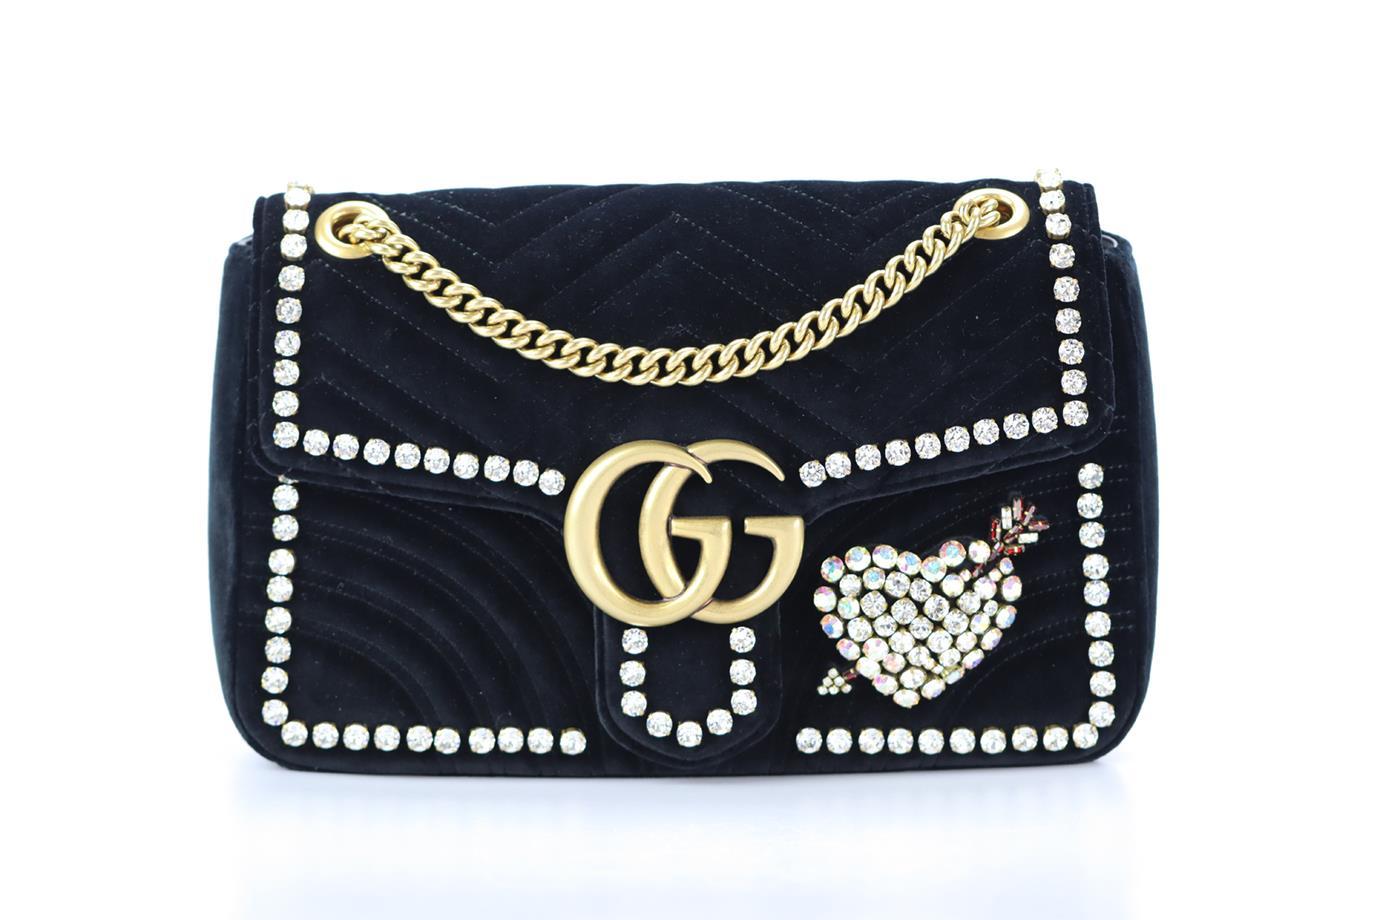 Gucci Gg Marmont Medium Crystal Embellished Quilted Velvet Shoulder Bag. Black. Clasp fastening - Front. Comes with - dustbag. Height: 7 in. Width: 12.1 in. Depth: 2.7 in. Strap drop: 20.4 in. Condition: Used. Very good condition - Barely used. Few